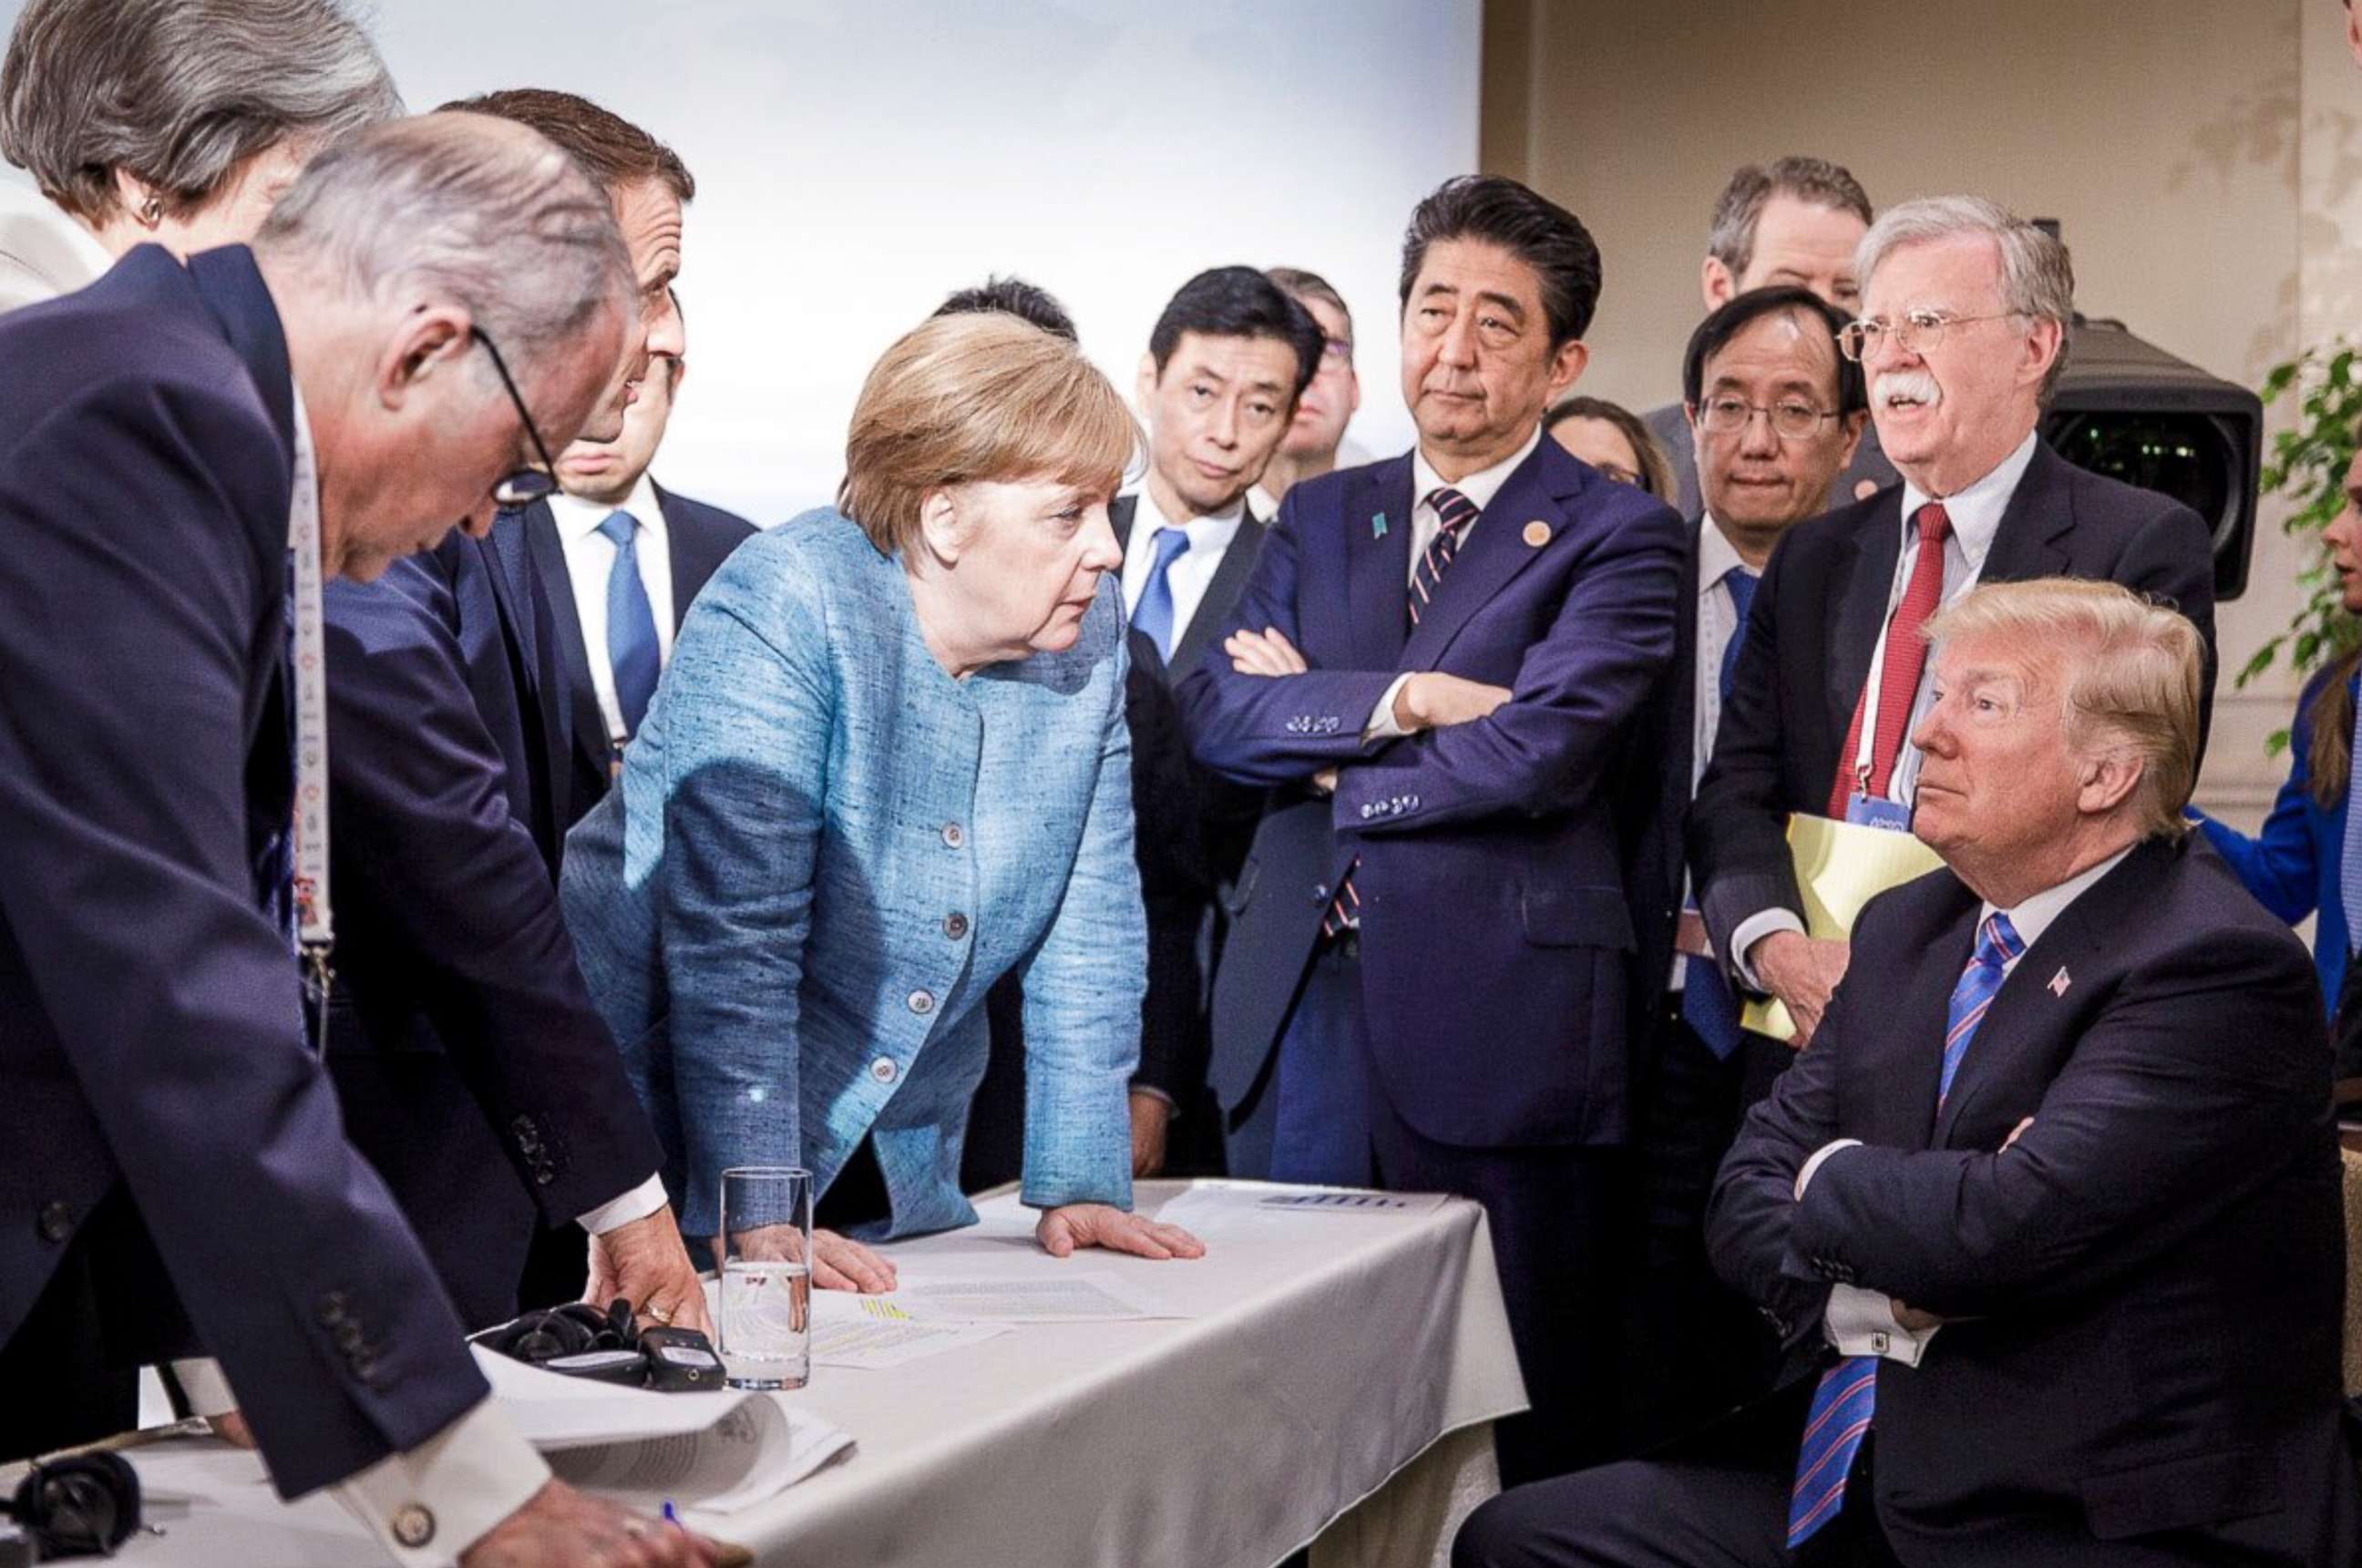 PHOTO: In this photo made available by the German Federal Government, German Chancellor Angela Merkel, center, speaks with U.S. President Donald Trump, seated at right, during the G7 Leaders Summit in La Malbaie, Quebec, Canada, June 9, 2018. 